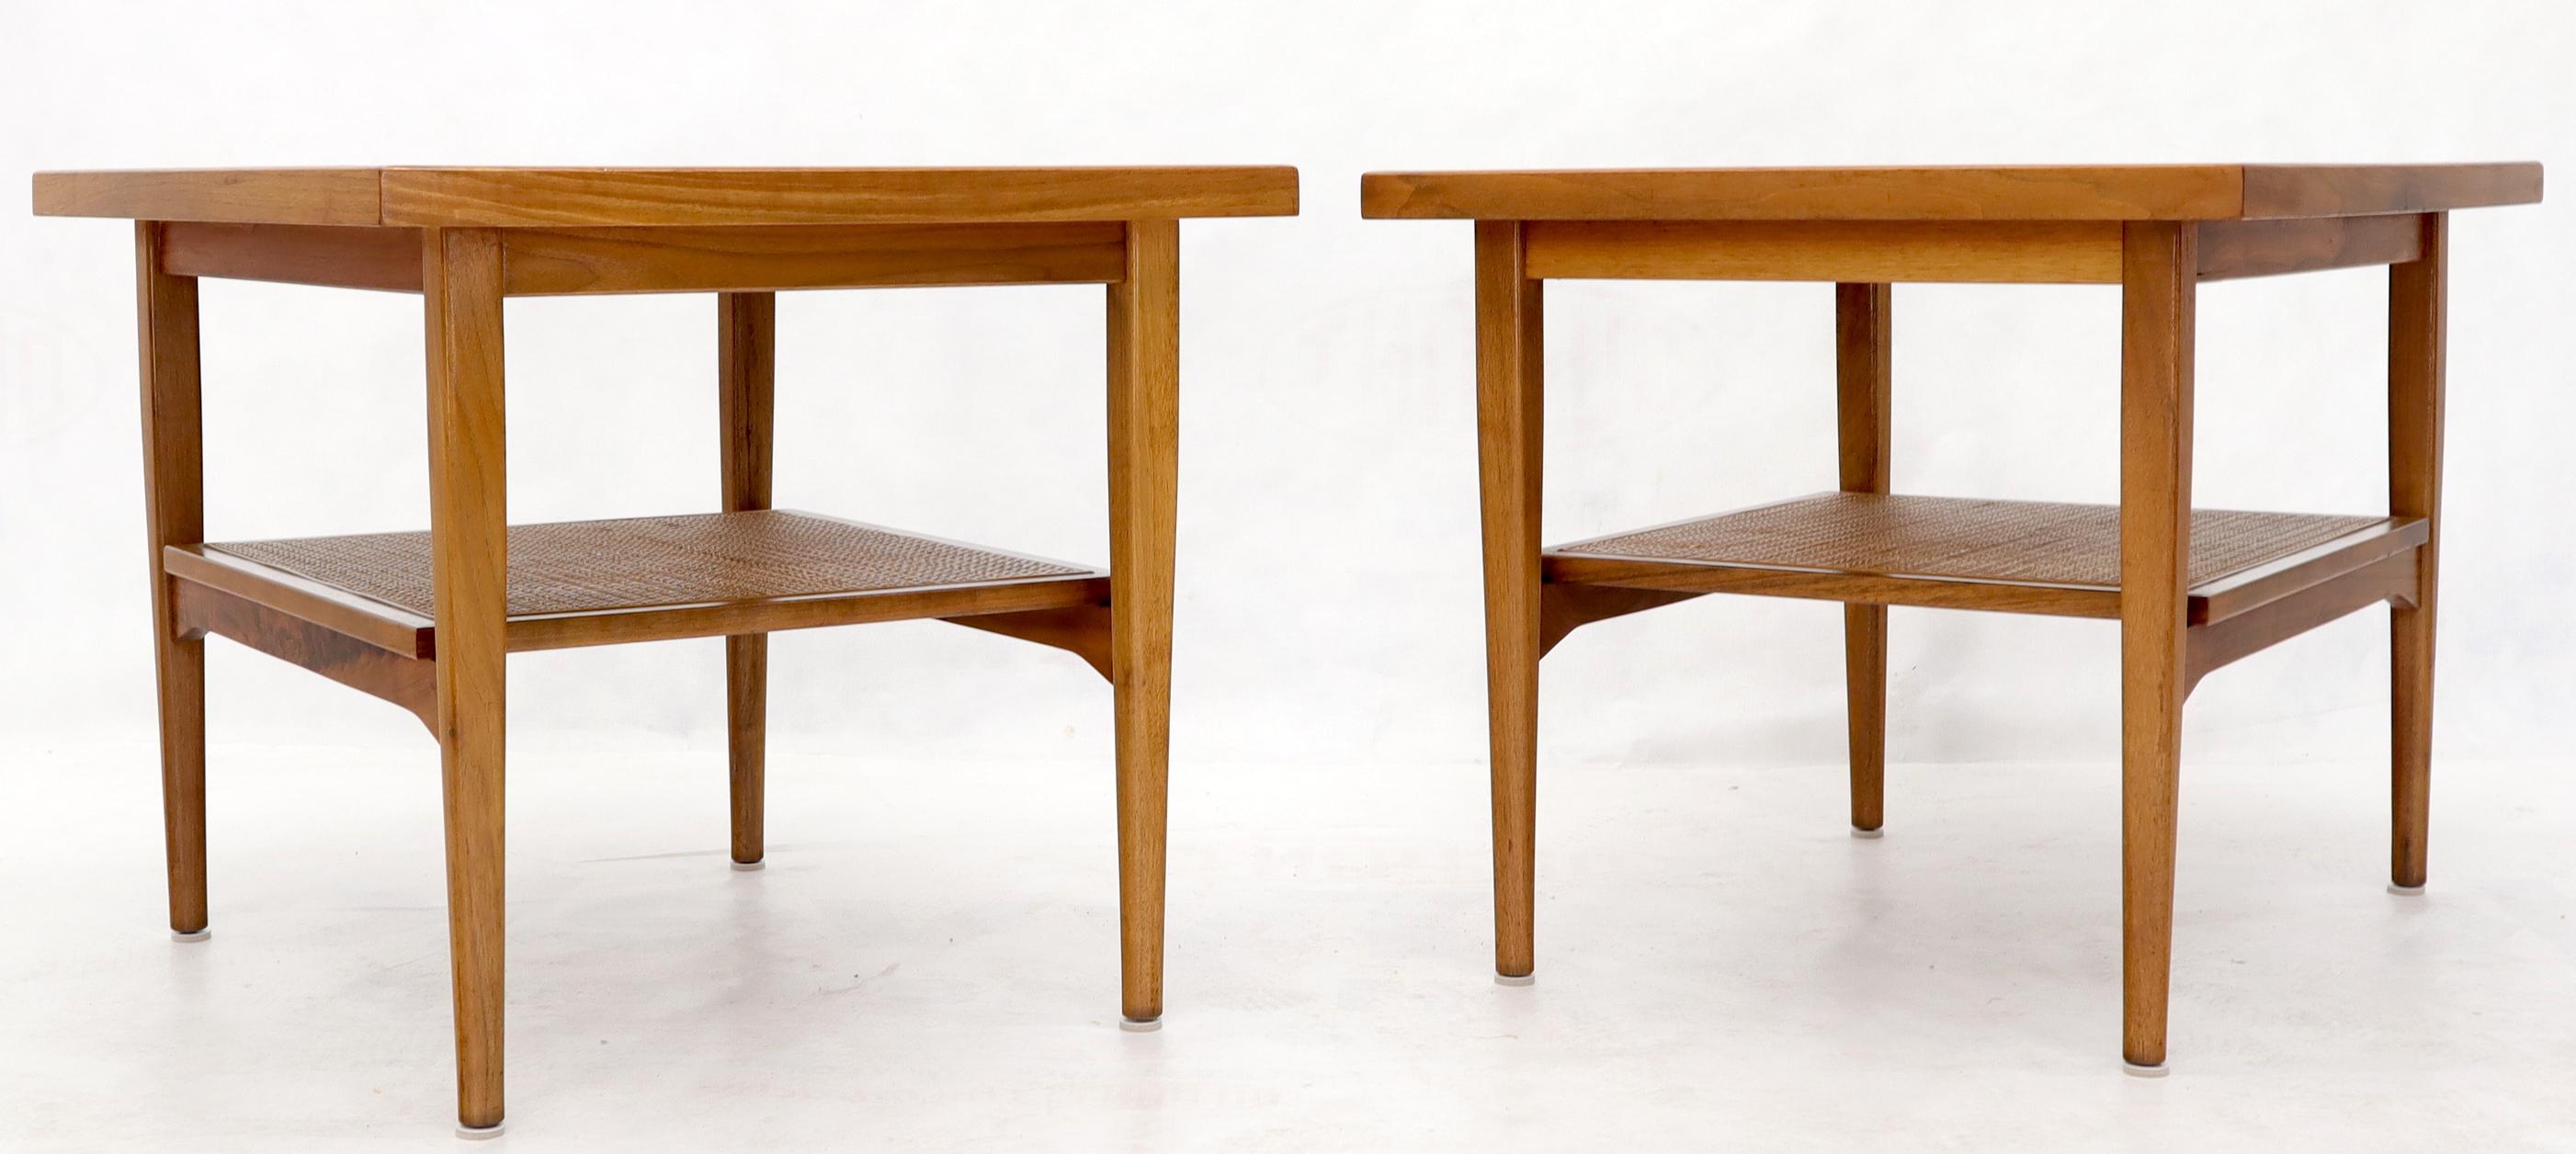 Pair of Mid-Century Modern oiled walnut end tables. Very clean original condition.